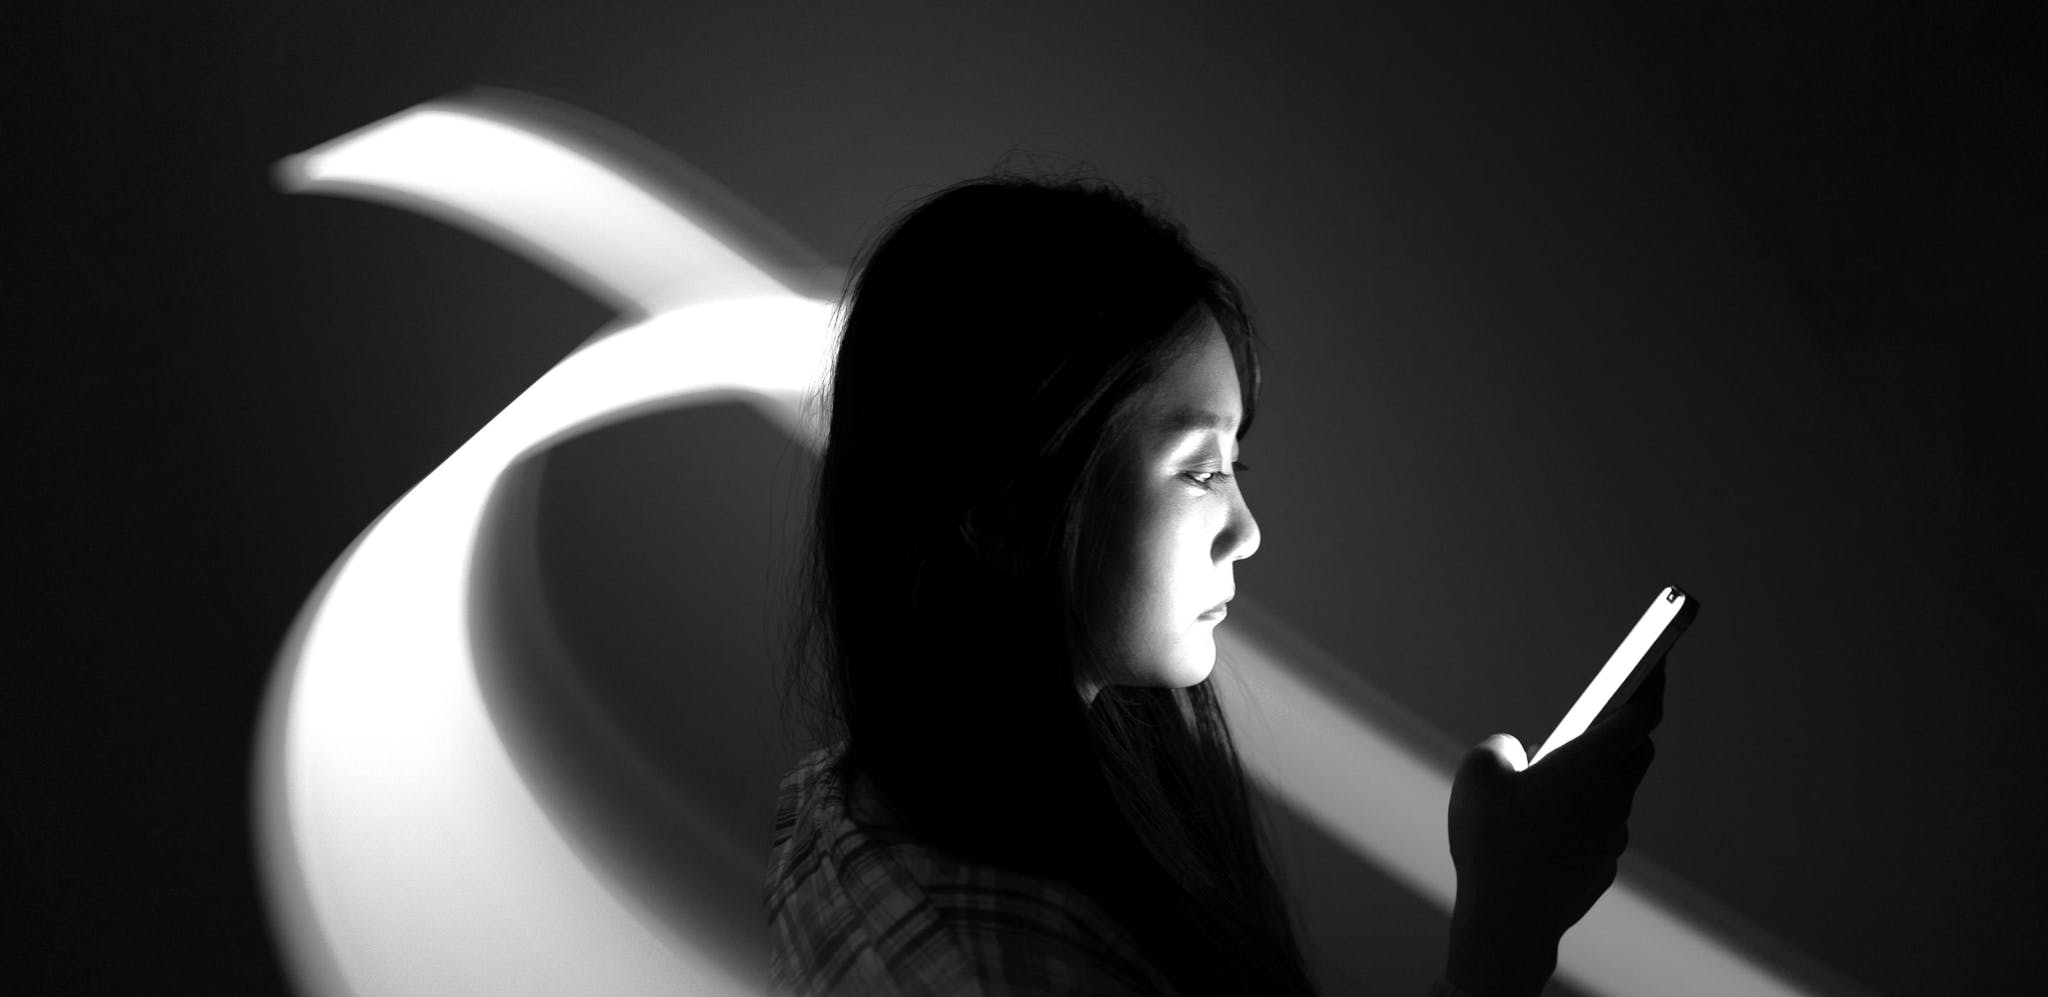 A person uses a mobile phone while two beams of light curve around them